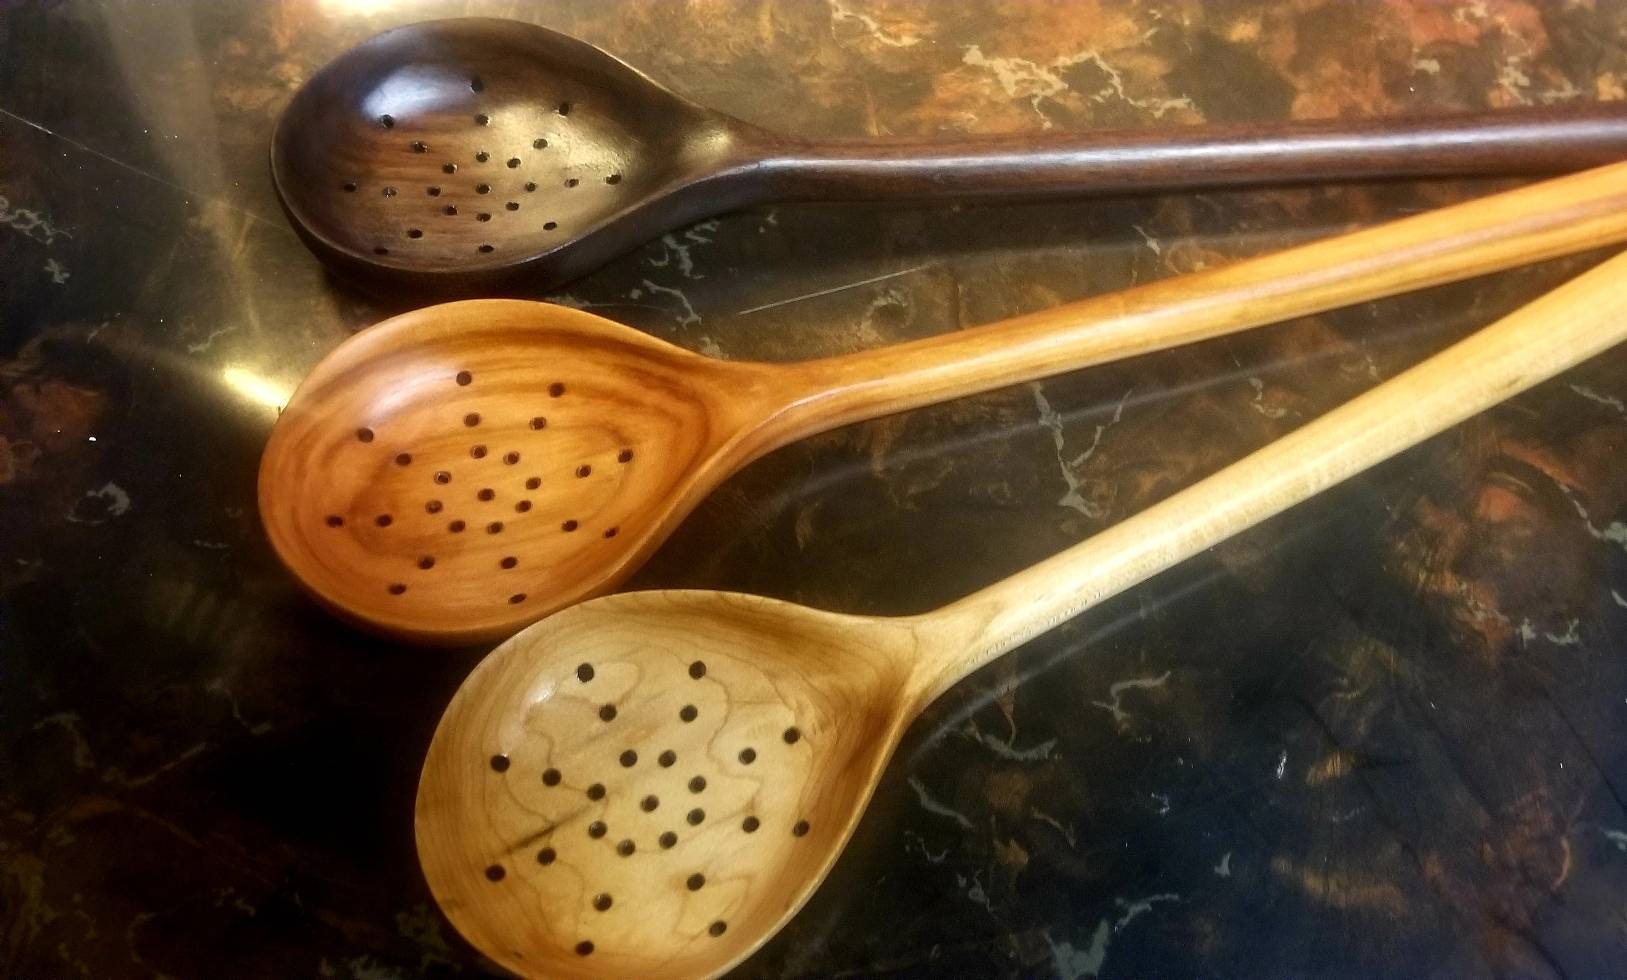 Ceramics Ladle Spoon Set of 2 Large Soup Ladle with Skimmer Slotted Spoons  Kitchen Ladles Hot Pot Strainer Spoons for Cooking Serving Stirring (Style